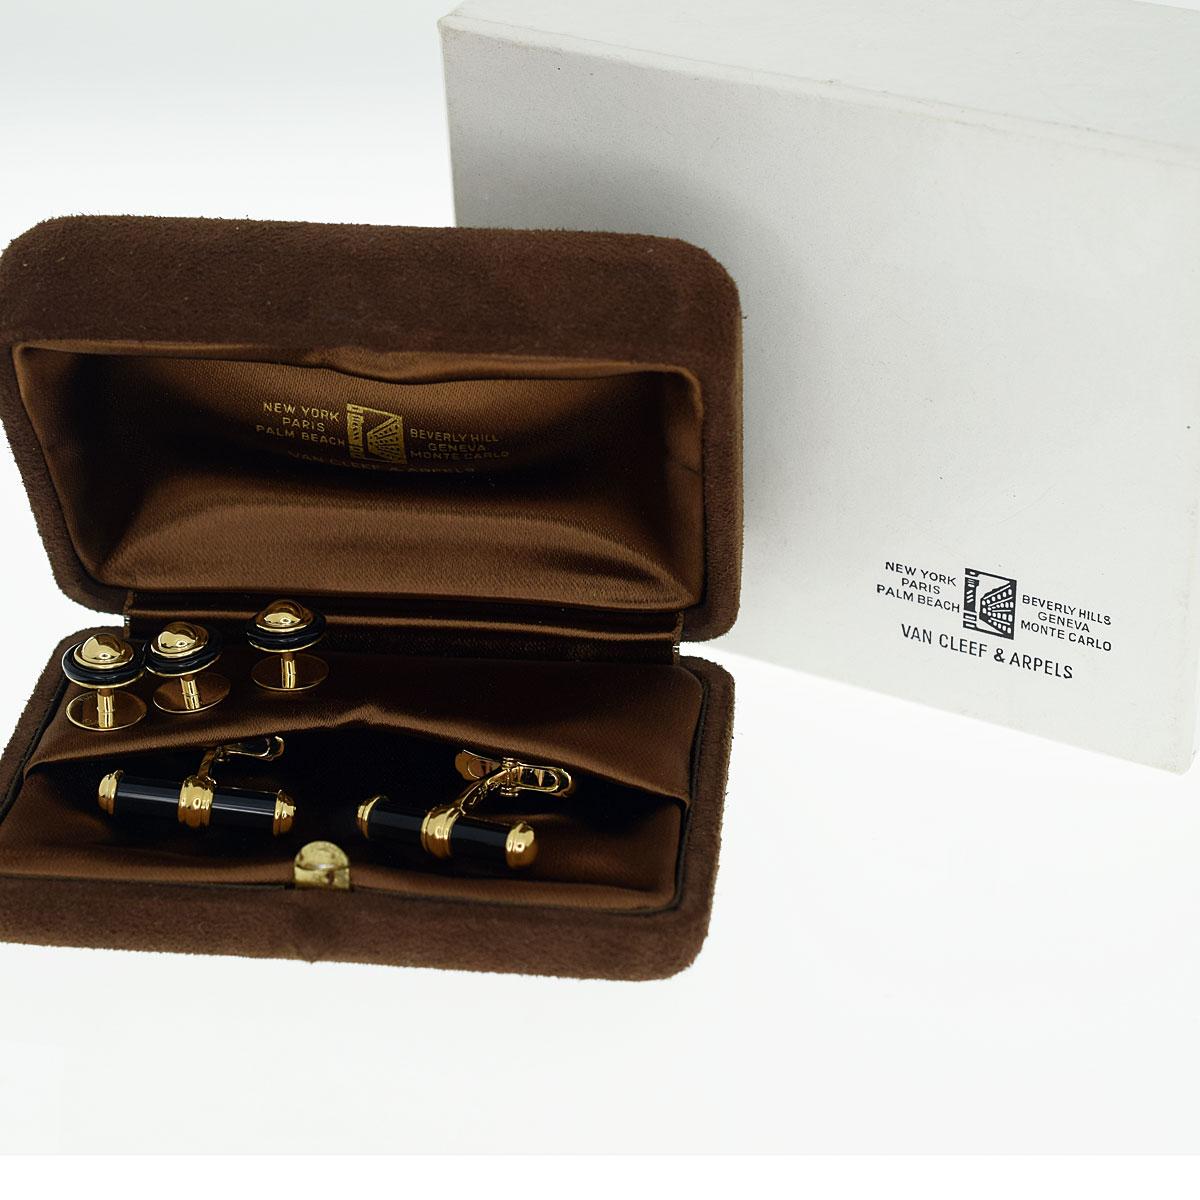 Brand : Van Cleef&Arpels
Name : Gold Onyx Cufflinks Studs Button Set
Material : Onyx, 750 K18 YG Yellow Gold
Comes with : Van Cleef & Arpels box, case,VCA repair certificate (Jan 2019)
Size : (inch) Cuffs 0.98